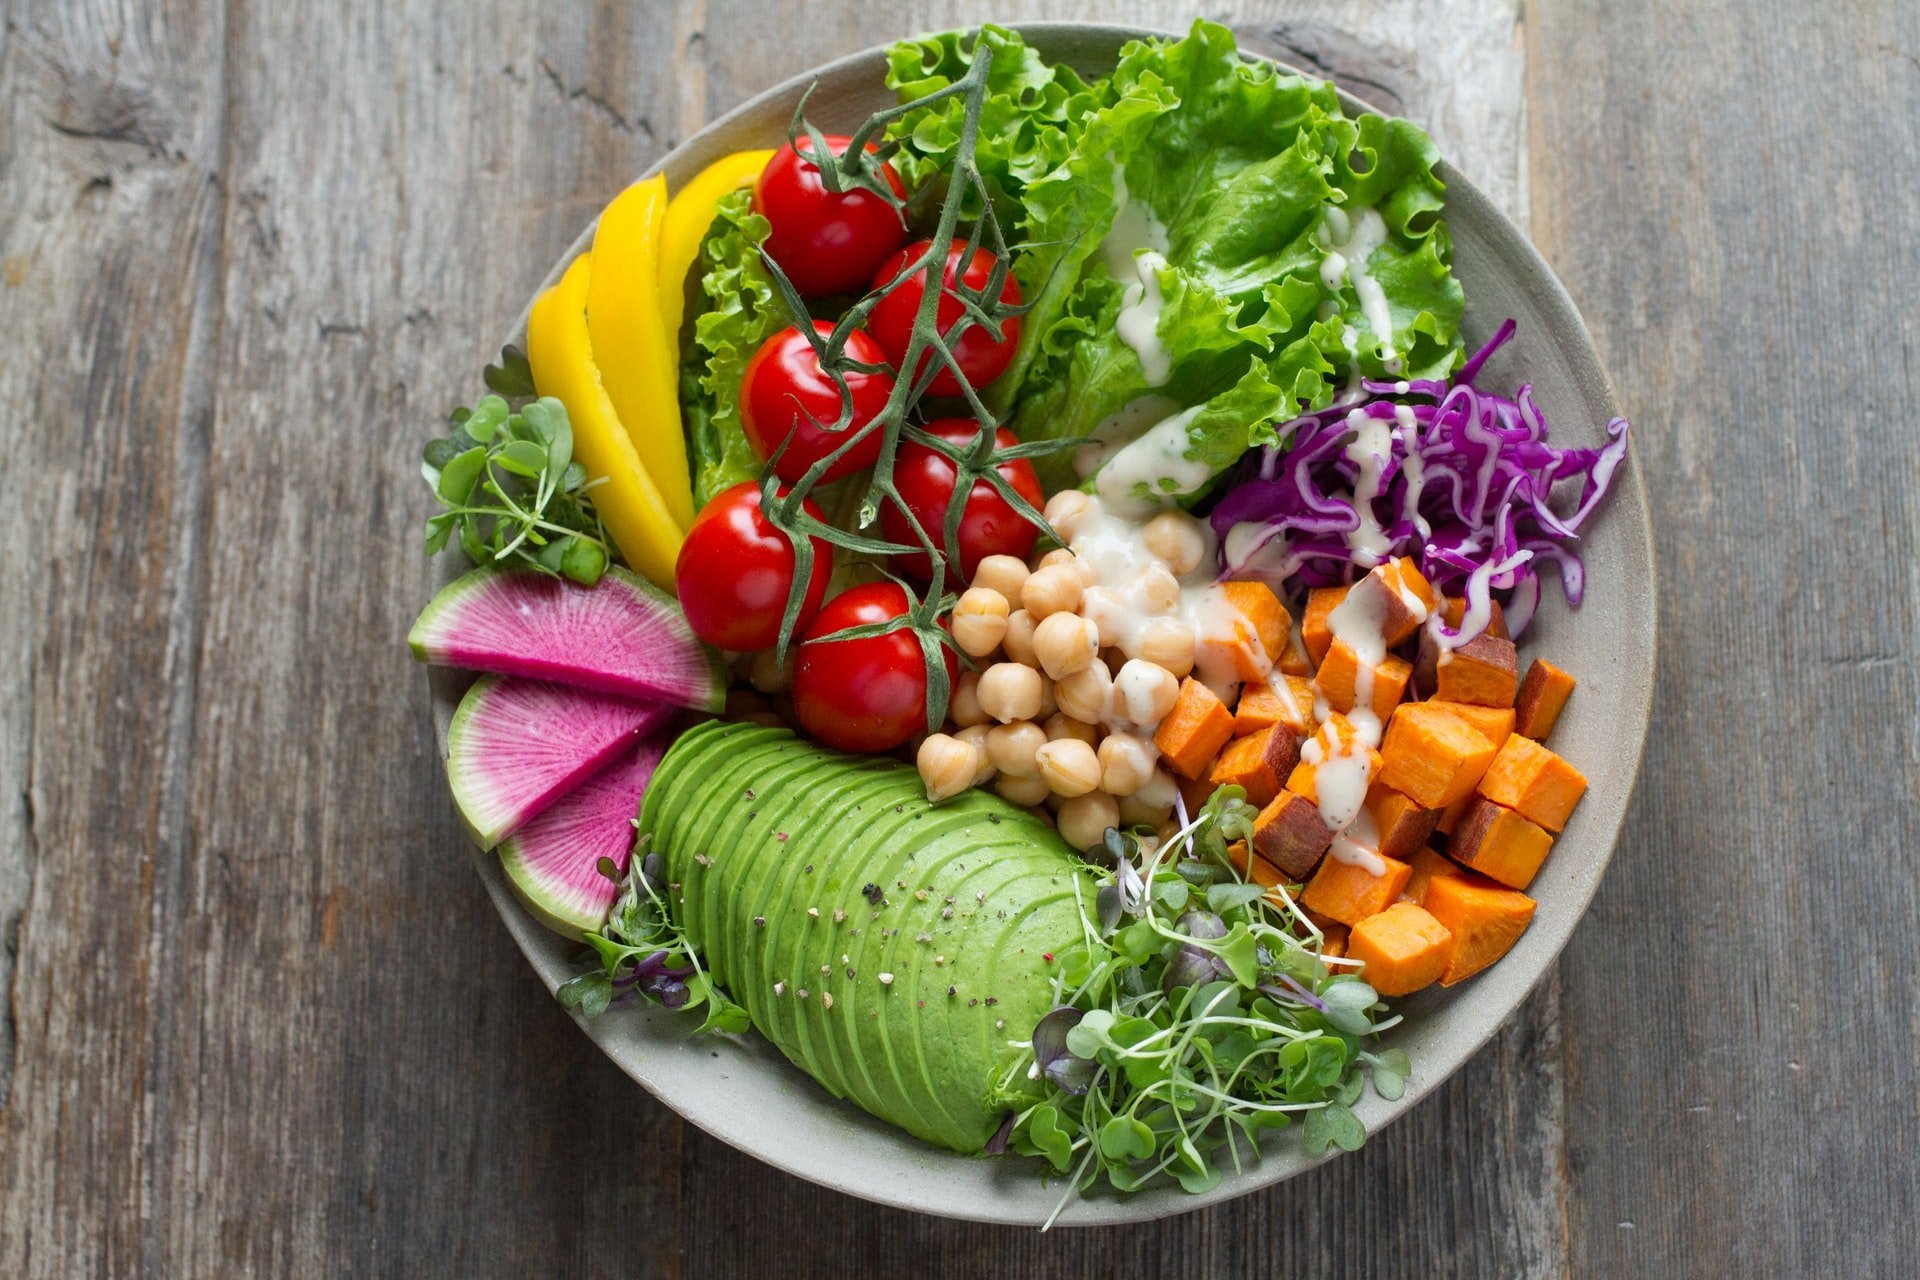 Plant-based diet and mental health: A plate full of fresh fruit and vegetables